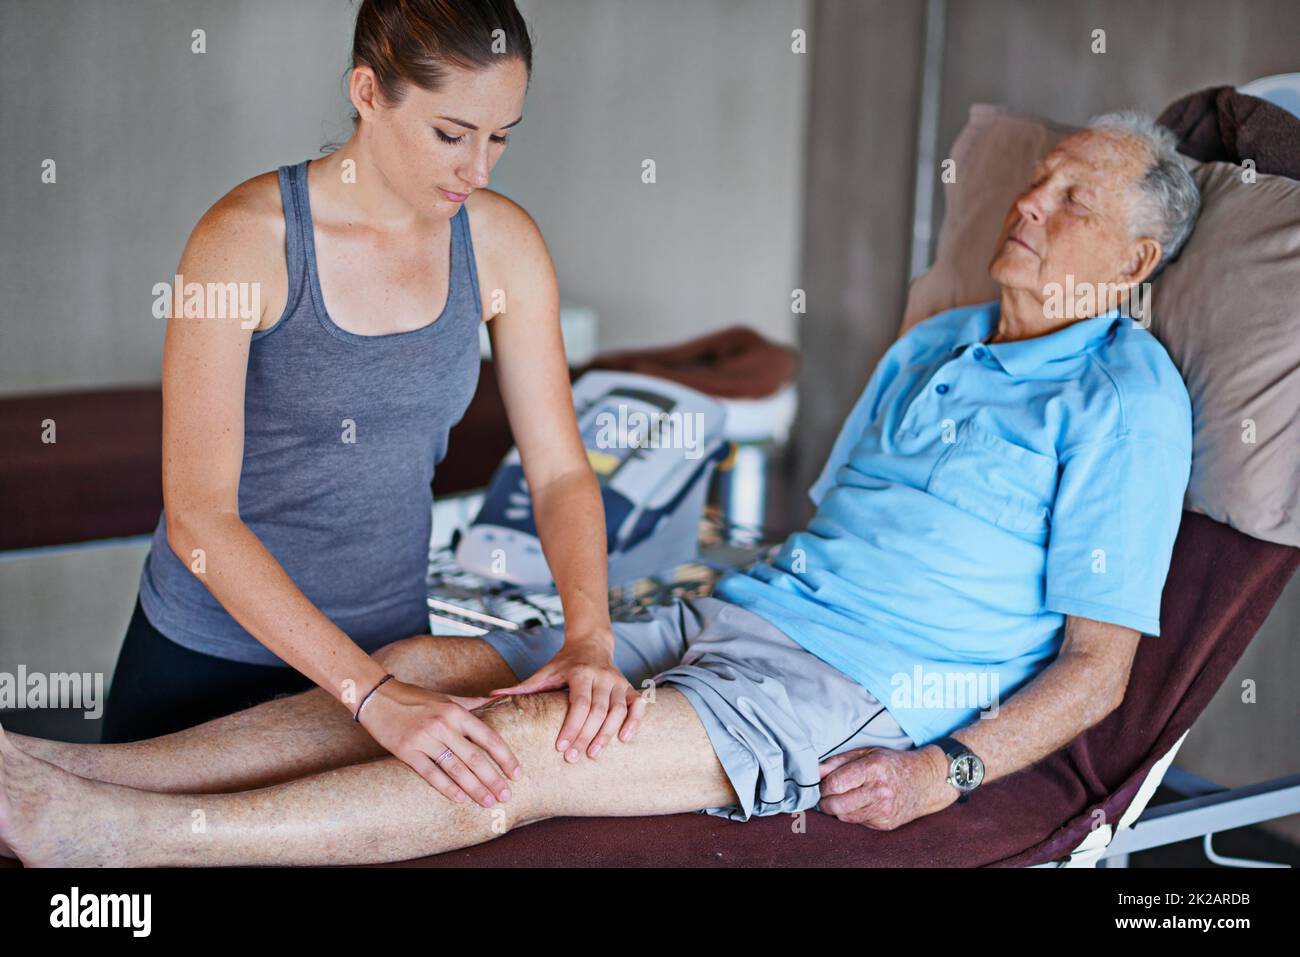 Working out the kinks. an elderly man having a physiotherapy session. Stock Photo